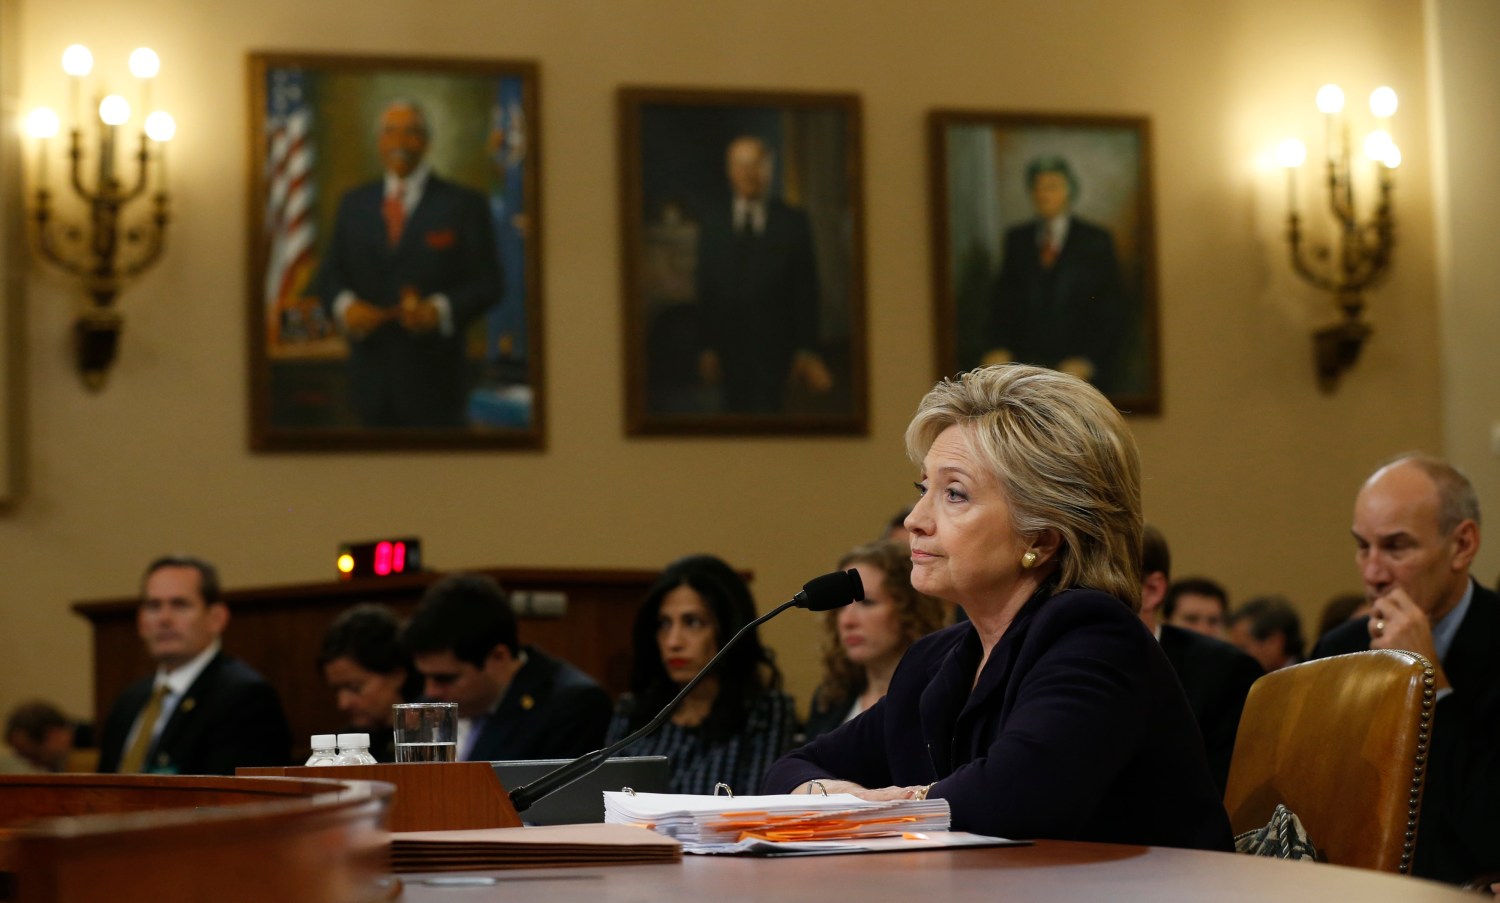 Democratic presidential candidate Hillary Clinton listens to a question as she testifies before the House Select Committee on Benghazi, on Capitol Hill in Washington October 22, 2015. The congressional committee is investigating the deadly 2012 attack on the U.S. diplomatic mission in Benghazi, Libya, when Clinton was the secretary of state.         REUTERS/Jonathan Ernst - TB3EBAM1CG6FG